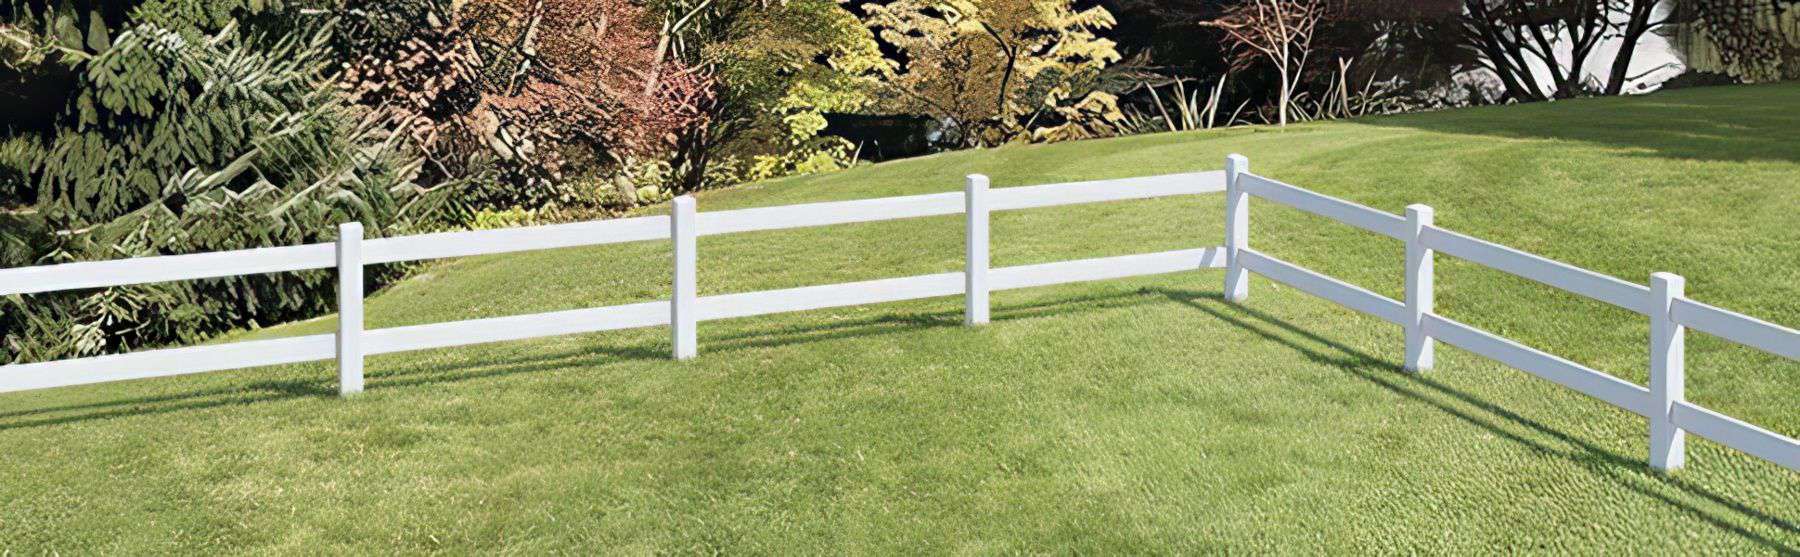 Vinyl 2-rail ranch fence in a serene country setting with a farmhouse, open field, lush lawn, and trees in the background.